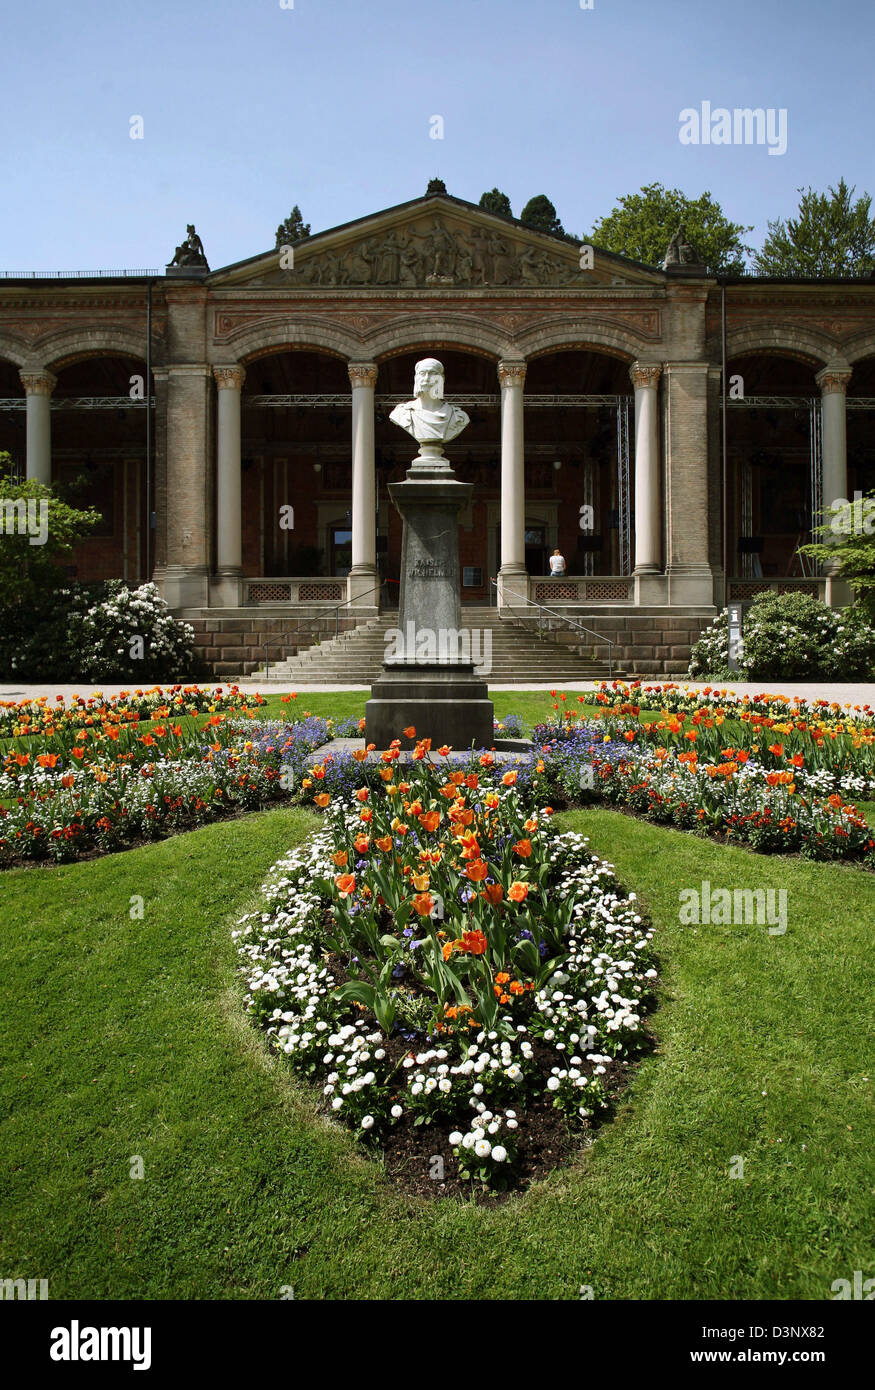 The photo shows the 'Kaiser Wilhelm-Denkmal' (monument) in front of the pump room in Baden-Baden, Germany, 01 June 2006. The pump room was built according to plans of Heinrich Huebsch in 1842. 16 corinthian columns support the 90m long open entrance hall with 14 wall paintings. Photo: Uli Deck Stock Photo